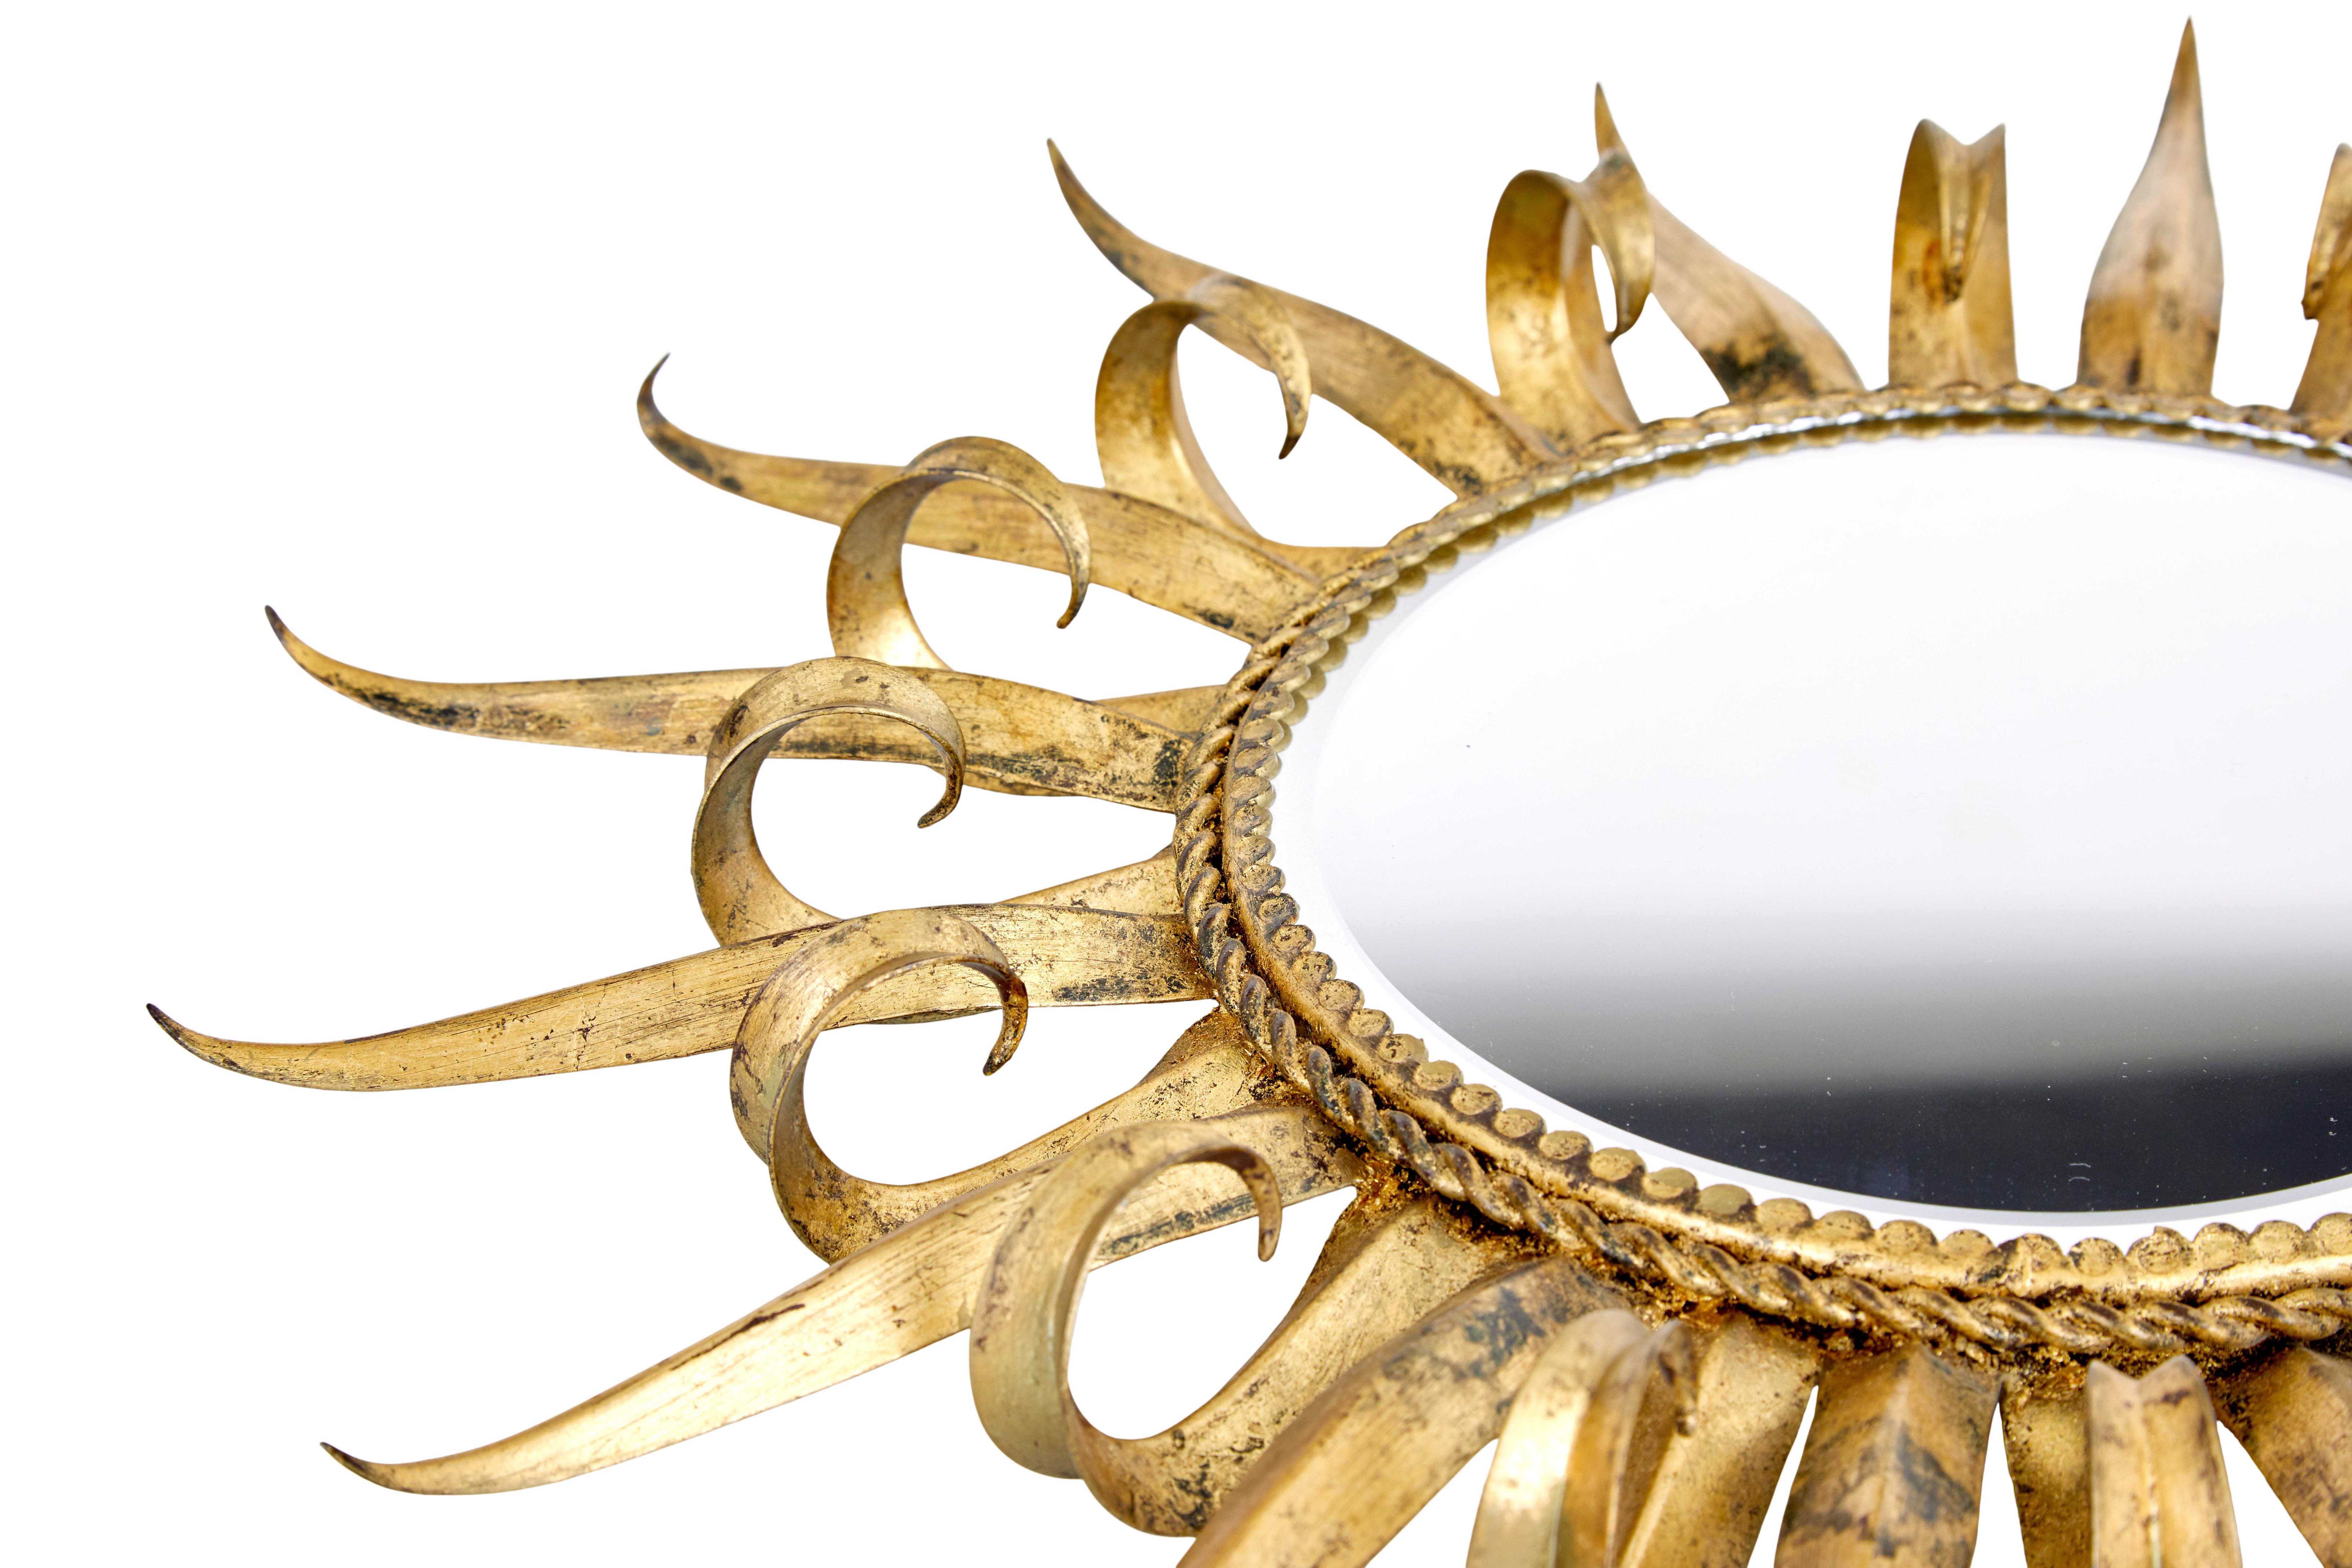 Mid century decorative sunburst mirror circa 1970.

Scandinavian deco revival wall mirror.  Circular mirror with bevelled edged, beaded metal border, surrounded by alternating straight and curling metal leaves.  Presented in a weathered gold effect